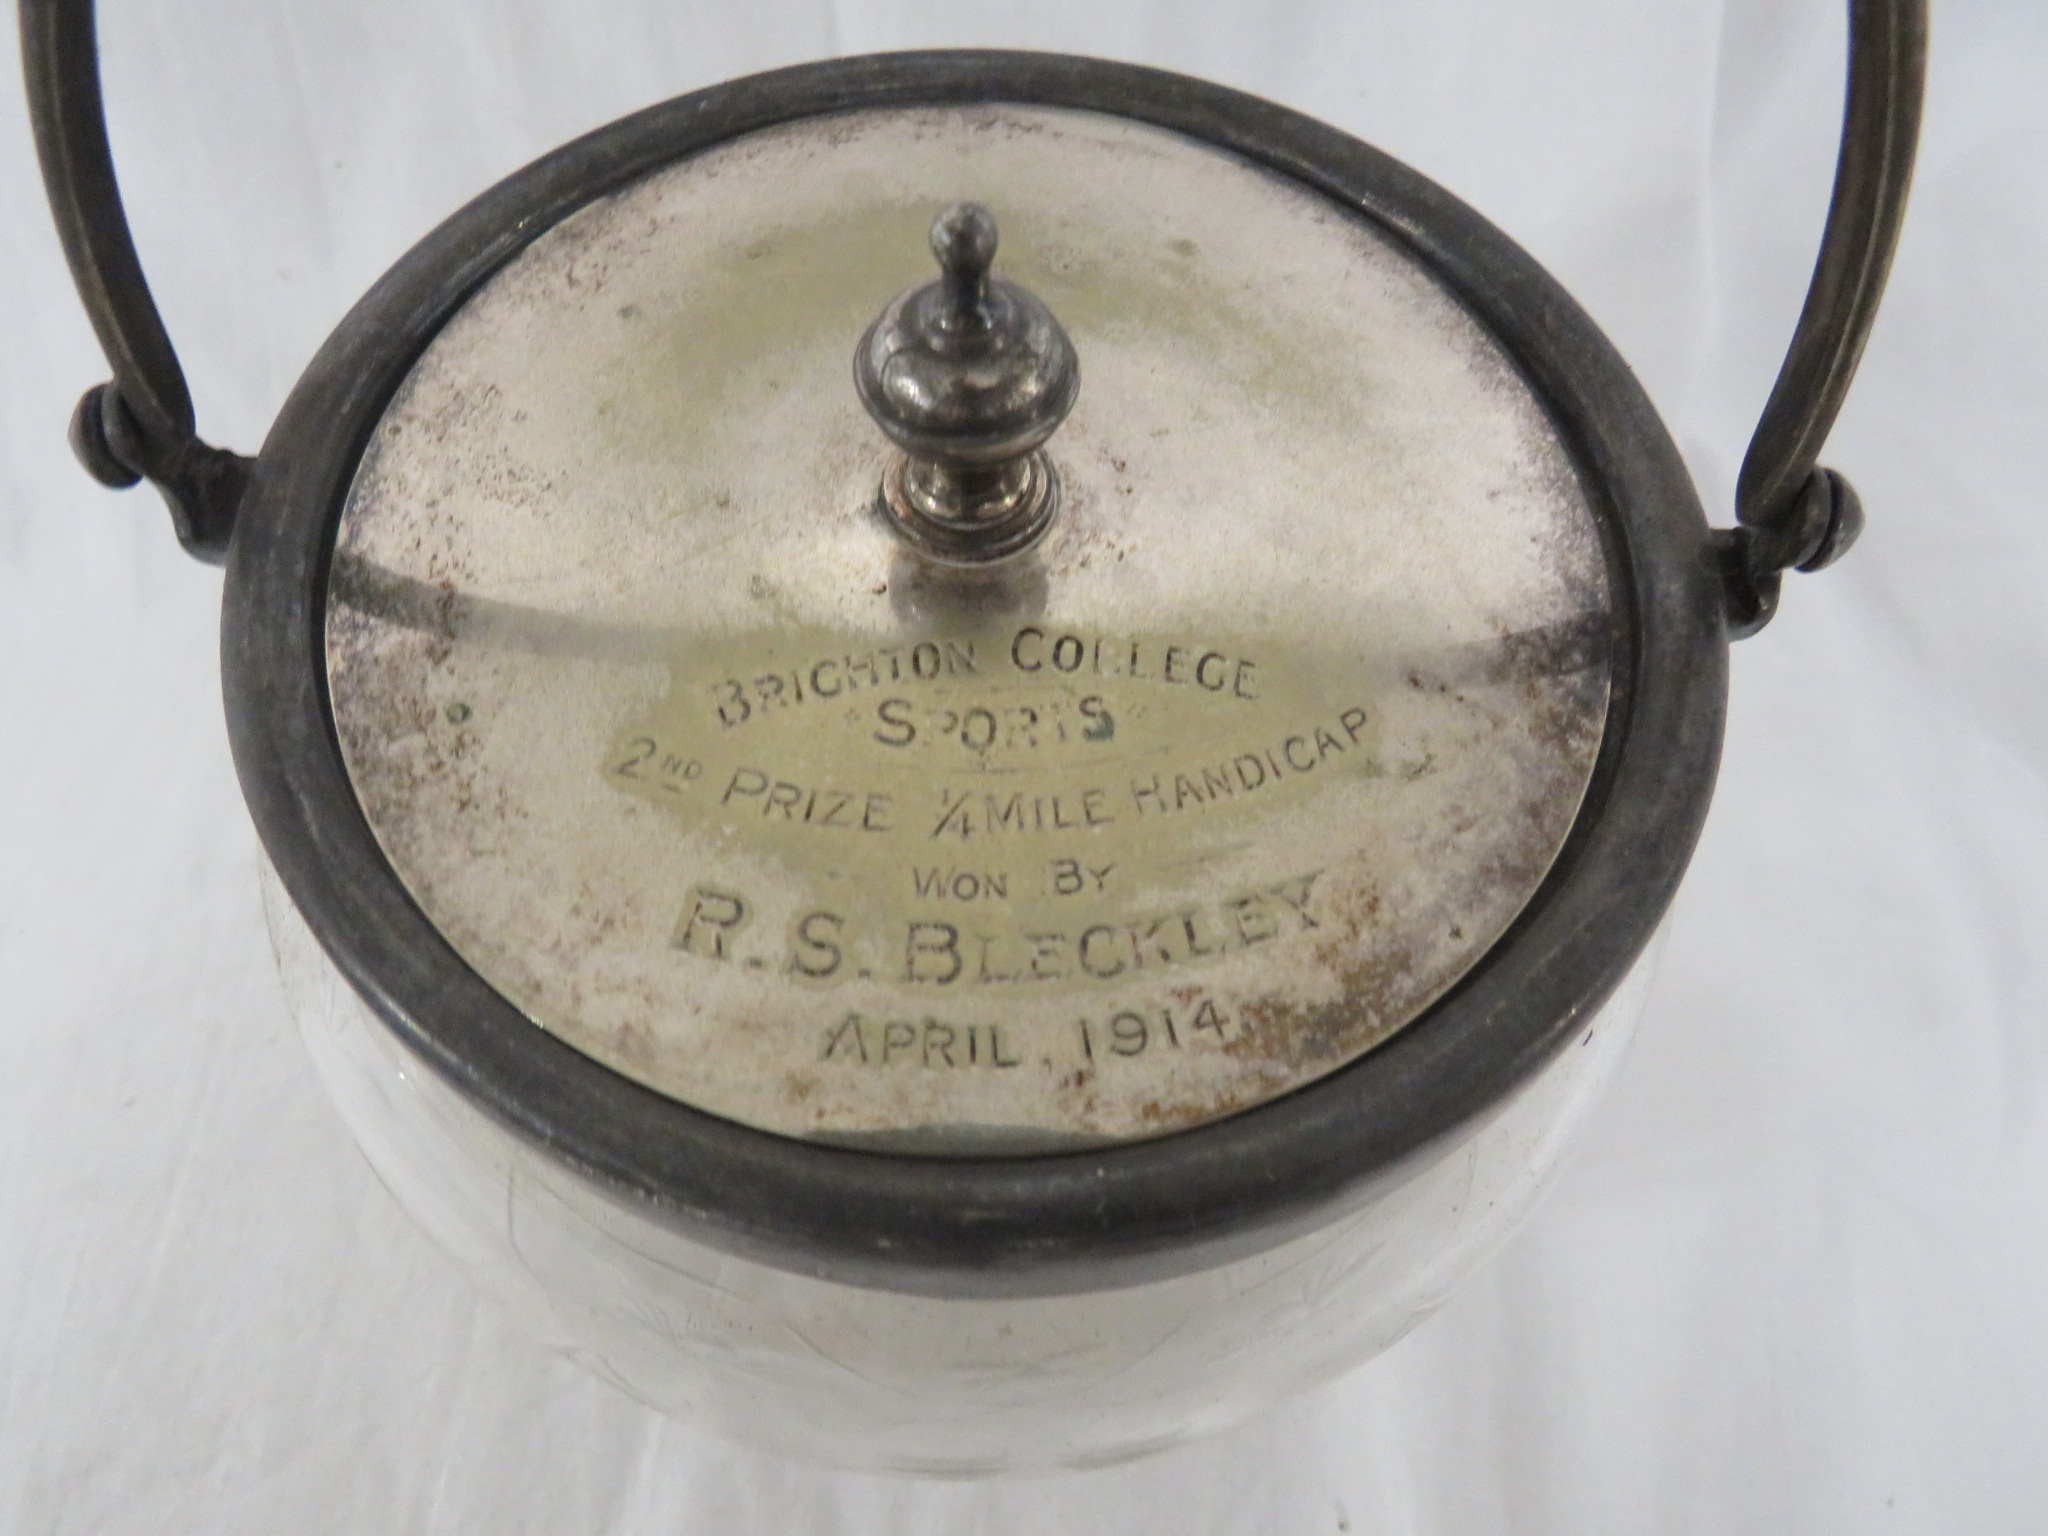 CUT GLASS BISCUIT BARREL WITH SILVER PLATED LID WITH 1914 BRIGHTON COLLEGE SPORTS ENGRAVING TO R S - Image 3 of 3